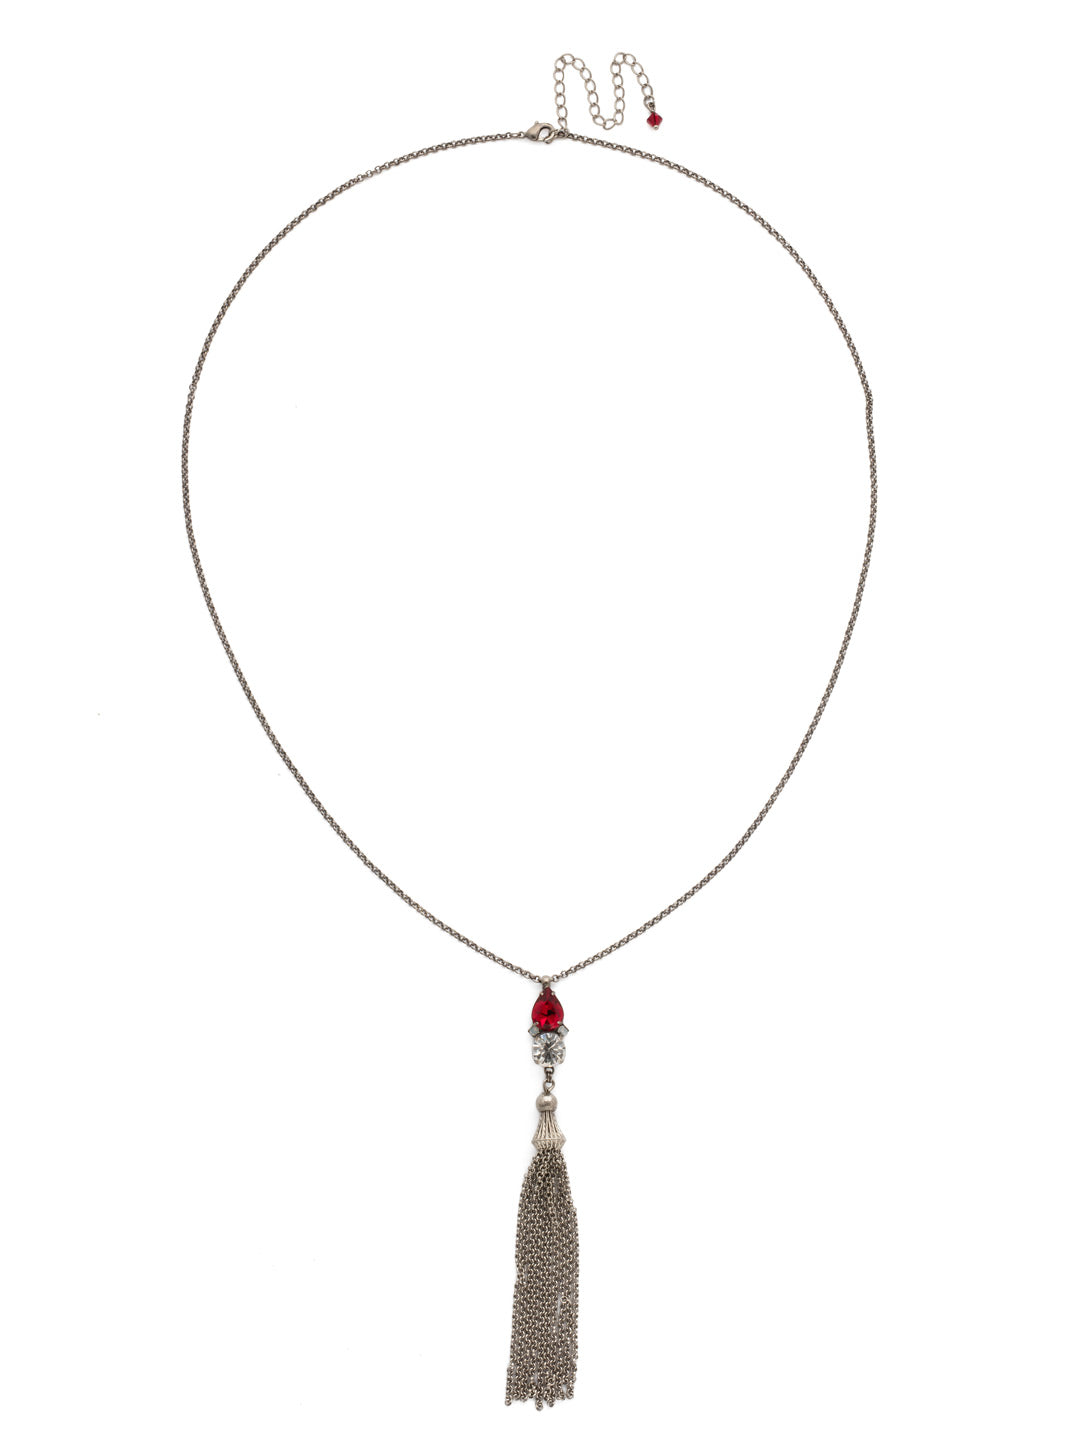 Timeless Tassel Necklace - NDN51ASCP - Our Tassel Necklace has pear and round shaped crystals embellish an ornamental tassel. Wear alone or with your favorite pendants and classic styles. From Sorrelli's Crimson Pride collection in our Antique Silver-tone finish.